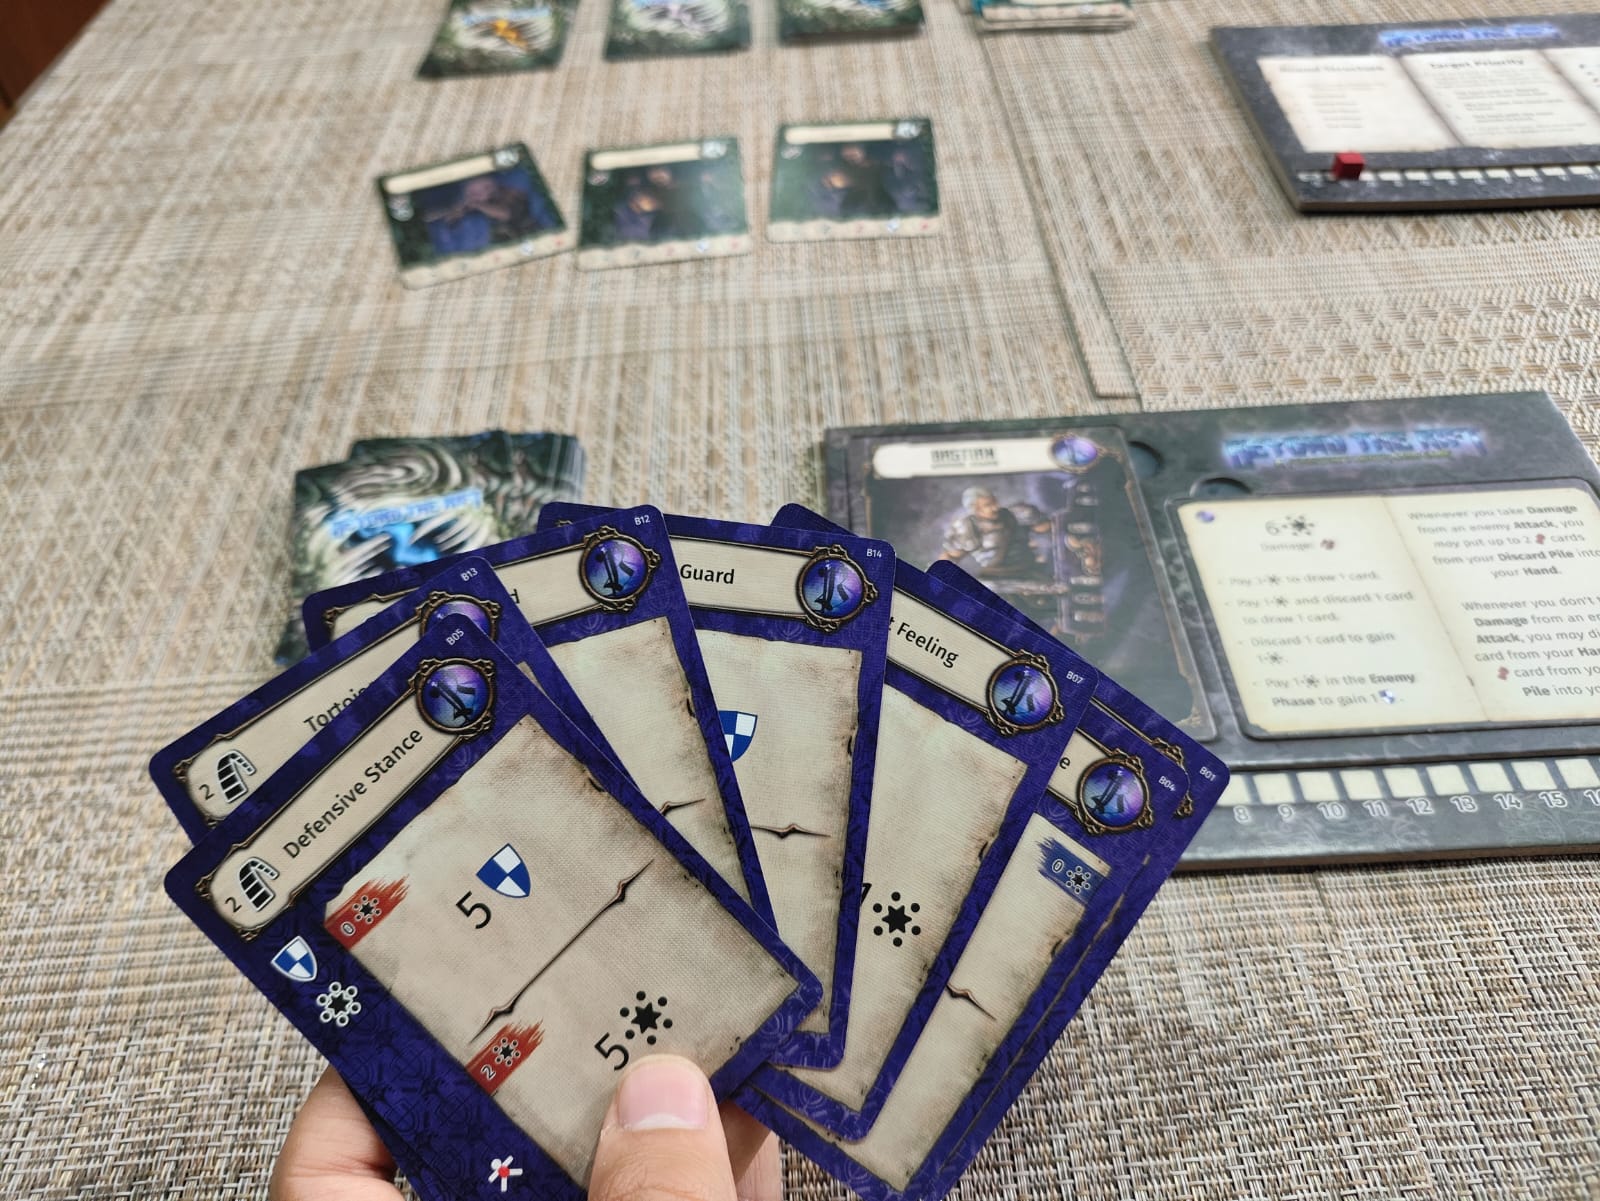 Reseña Beyond the Rift: A Perdition's Mouth Card Game 2